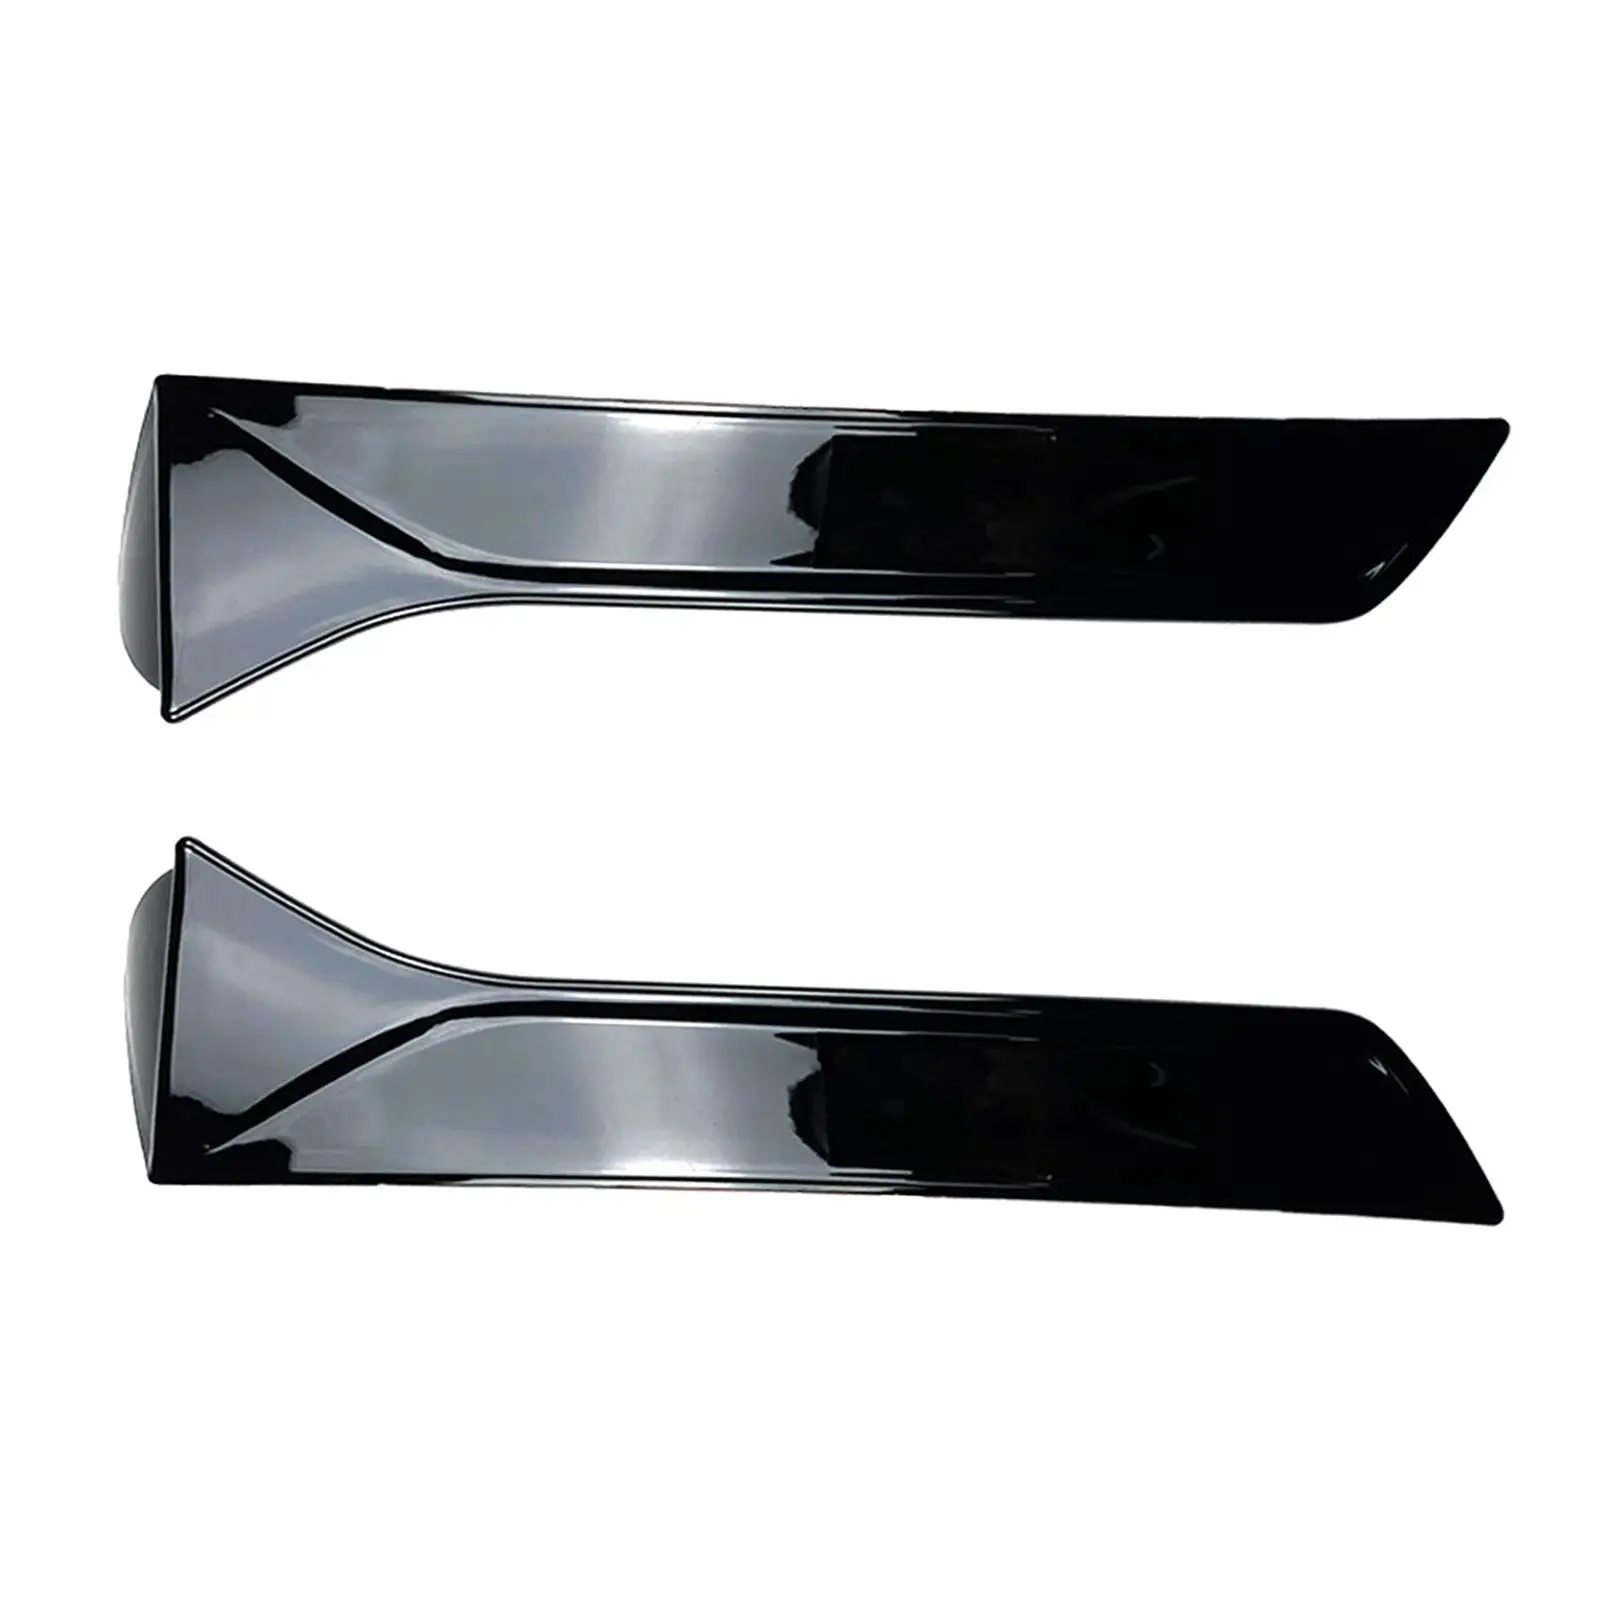 2x Car Window Spoiler Exterior Decoration Accessories Tail Flap Auto Rear Roof Vertical Splitter Cover for Seat Leon 5F FR